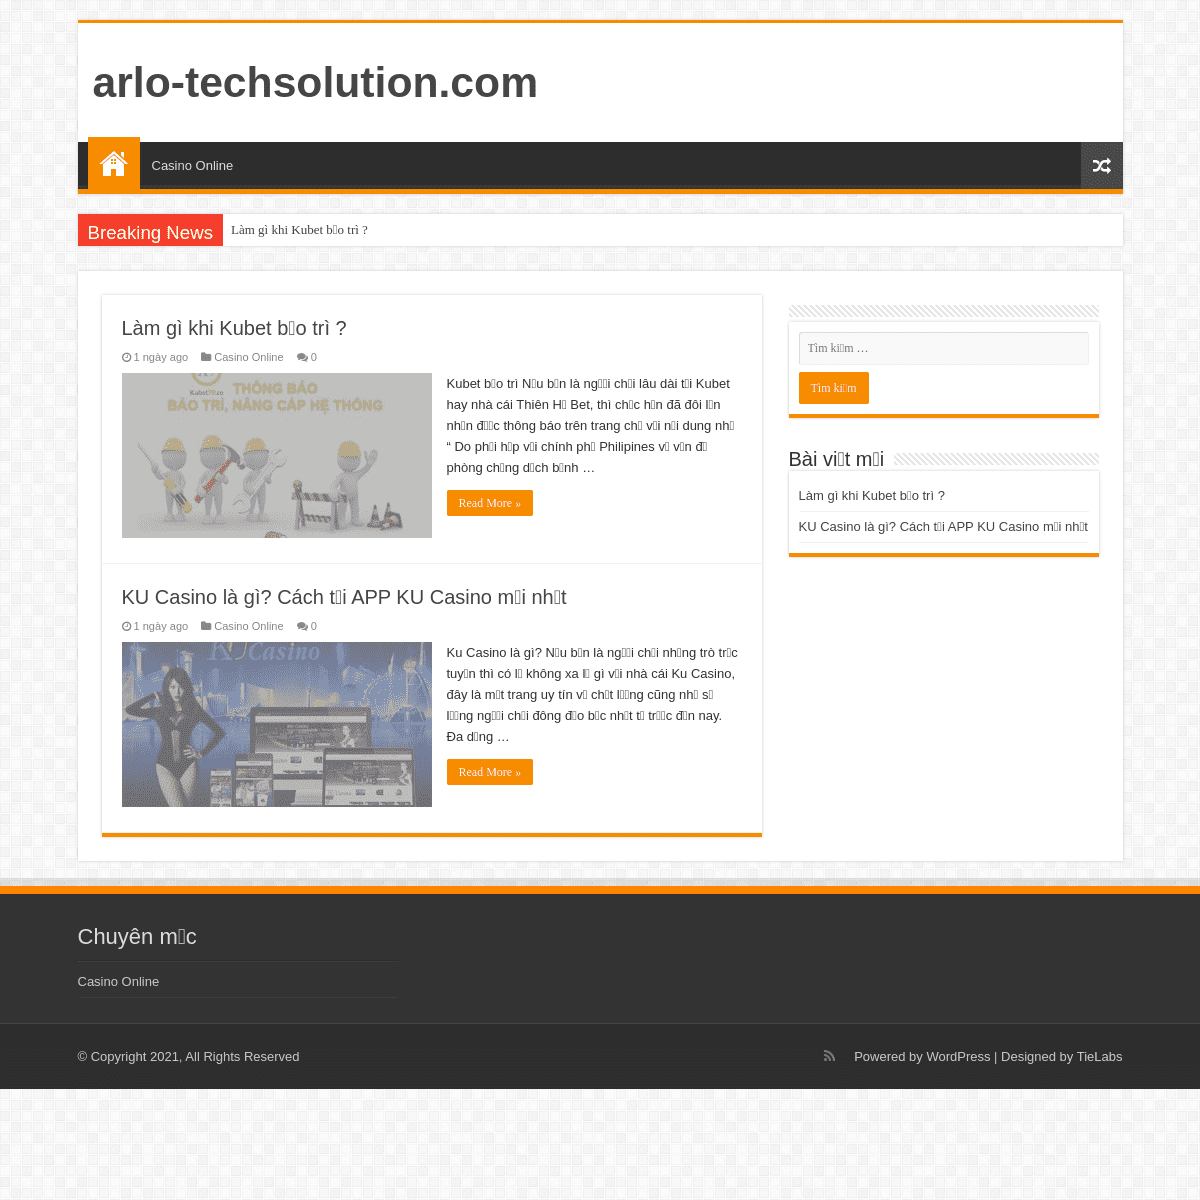 A complete backup of https://arlo-techsolution.com